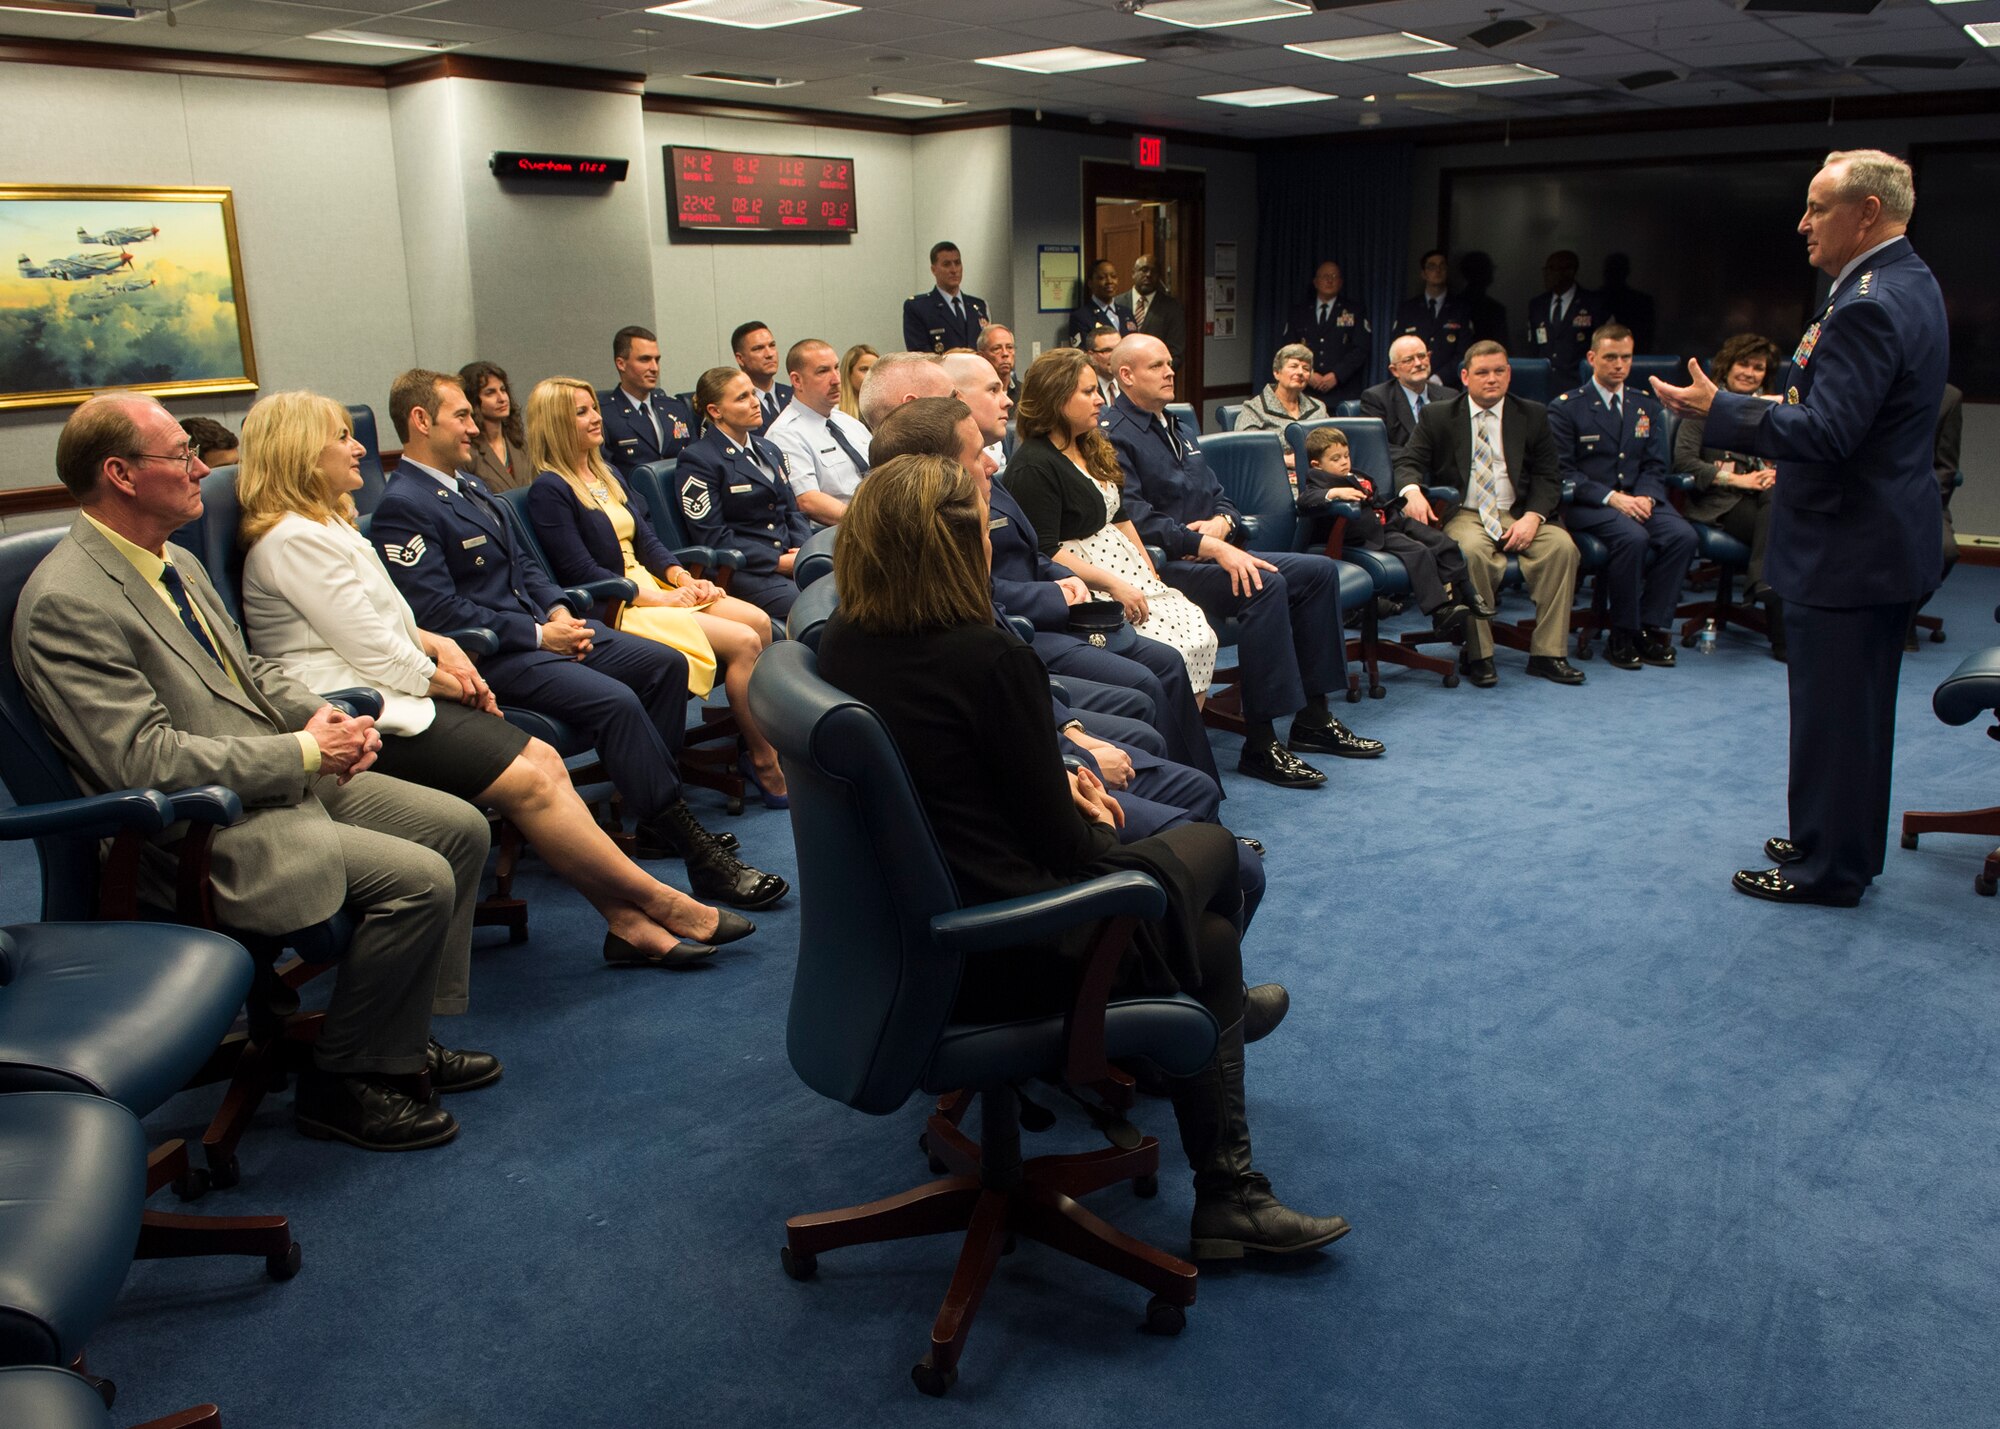 Air Force Chief of Staff Gen. Mark. A Welsh III talks with the 2014 and 2015 Lance P. Sijan Leadership award winners prior to their award ceremony at the Pentagon in Washington, D.C., April 7, 2016. Each year, the award is given to a senior and junior officer and a senior and junior enlisted member who demonstrated outstanding leadership abilities throughout the year. The 2014 winners are: Lt. Col. Stephen Matthews, Capt. John Sullivan, Master Sgt. Janell McGivern and Senior Airman Tristen Windel. The winners for 2015 are: Maj. Patrick Kolesiak, Capt. David Plachno, Senior Master Sgt. Justin Deisch and Tech. Sgt. Kevin Henderson. (U.S. Air Force photo/Jim Varhegyi)